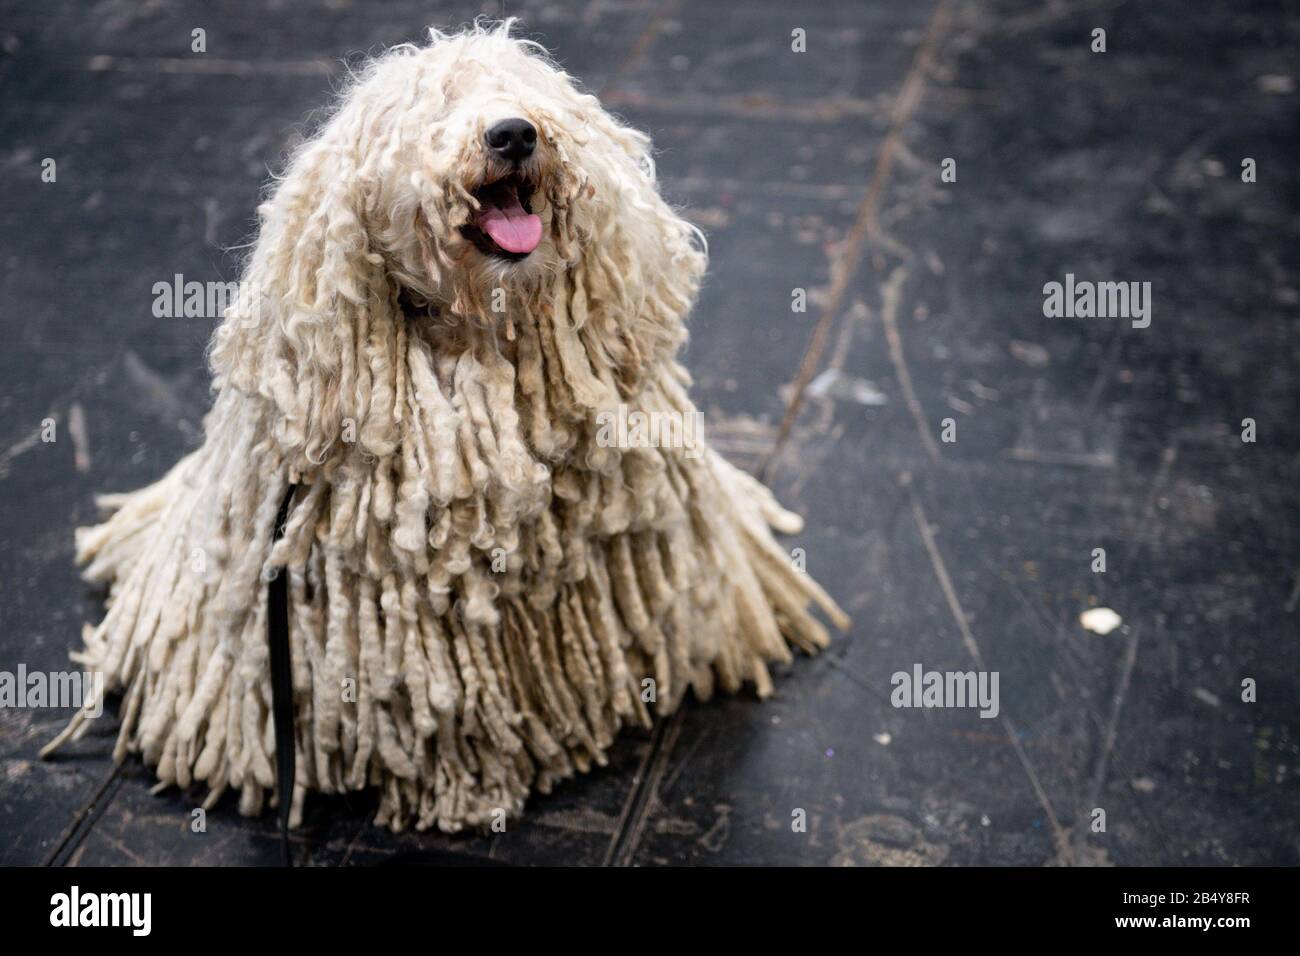 A Hungarian Puli at the Birmingham National Exhibition Centre (NEC) during the third day of the Crufts Dog Show. Stock Photo